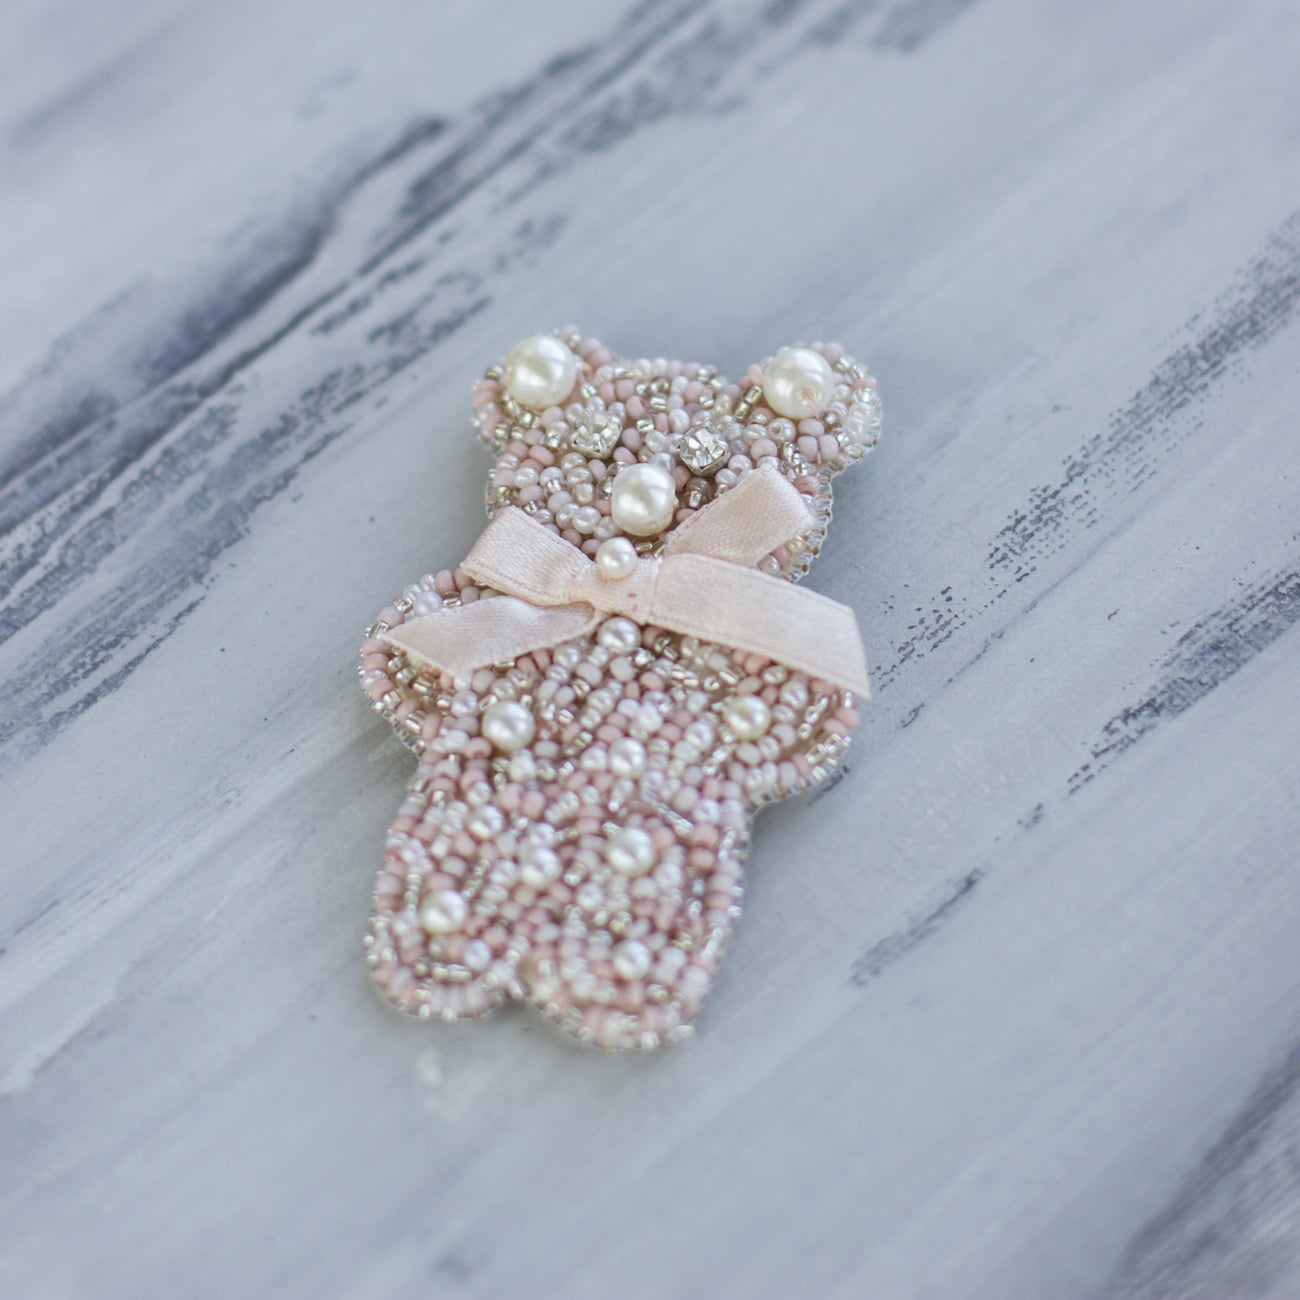 Shop women's jewelry at LeFlowers Bijouterie to discover unique handmade pieces for your wardrobe.   Pink embroidered brooch. Gift idea. Handmade bear brooch. Teddy bear accessories. Kids accessories. Brooch for kids